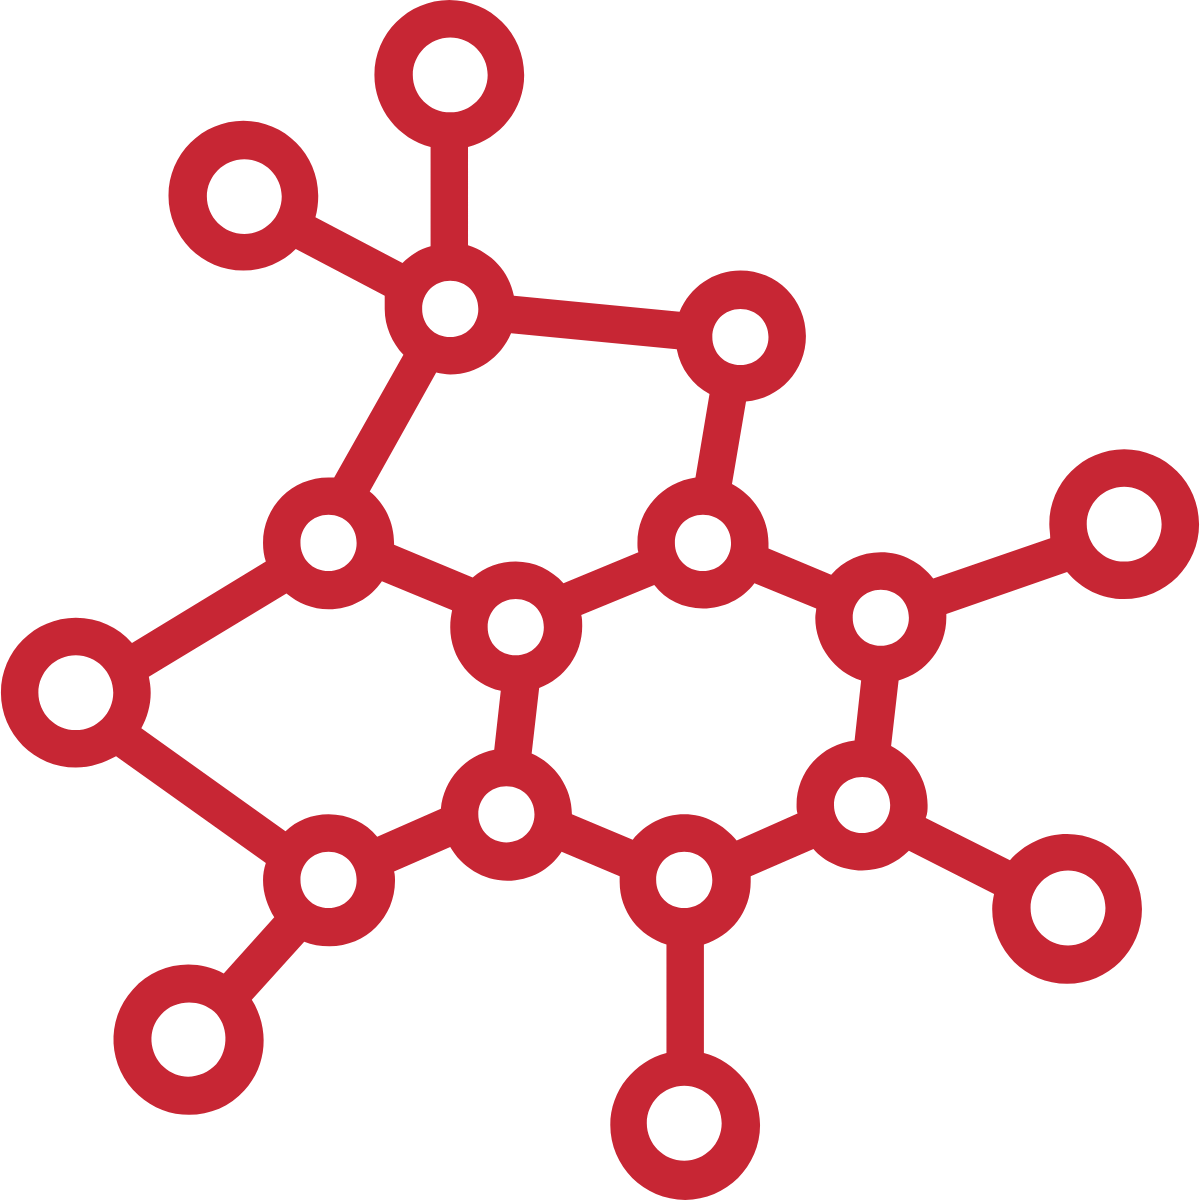 An illustration of a red molecular structure on a black background.